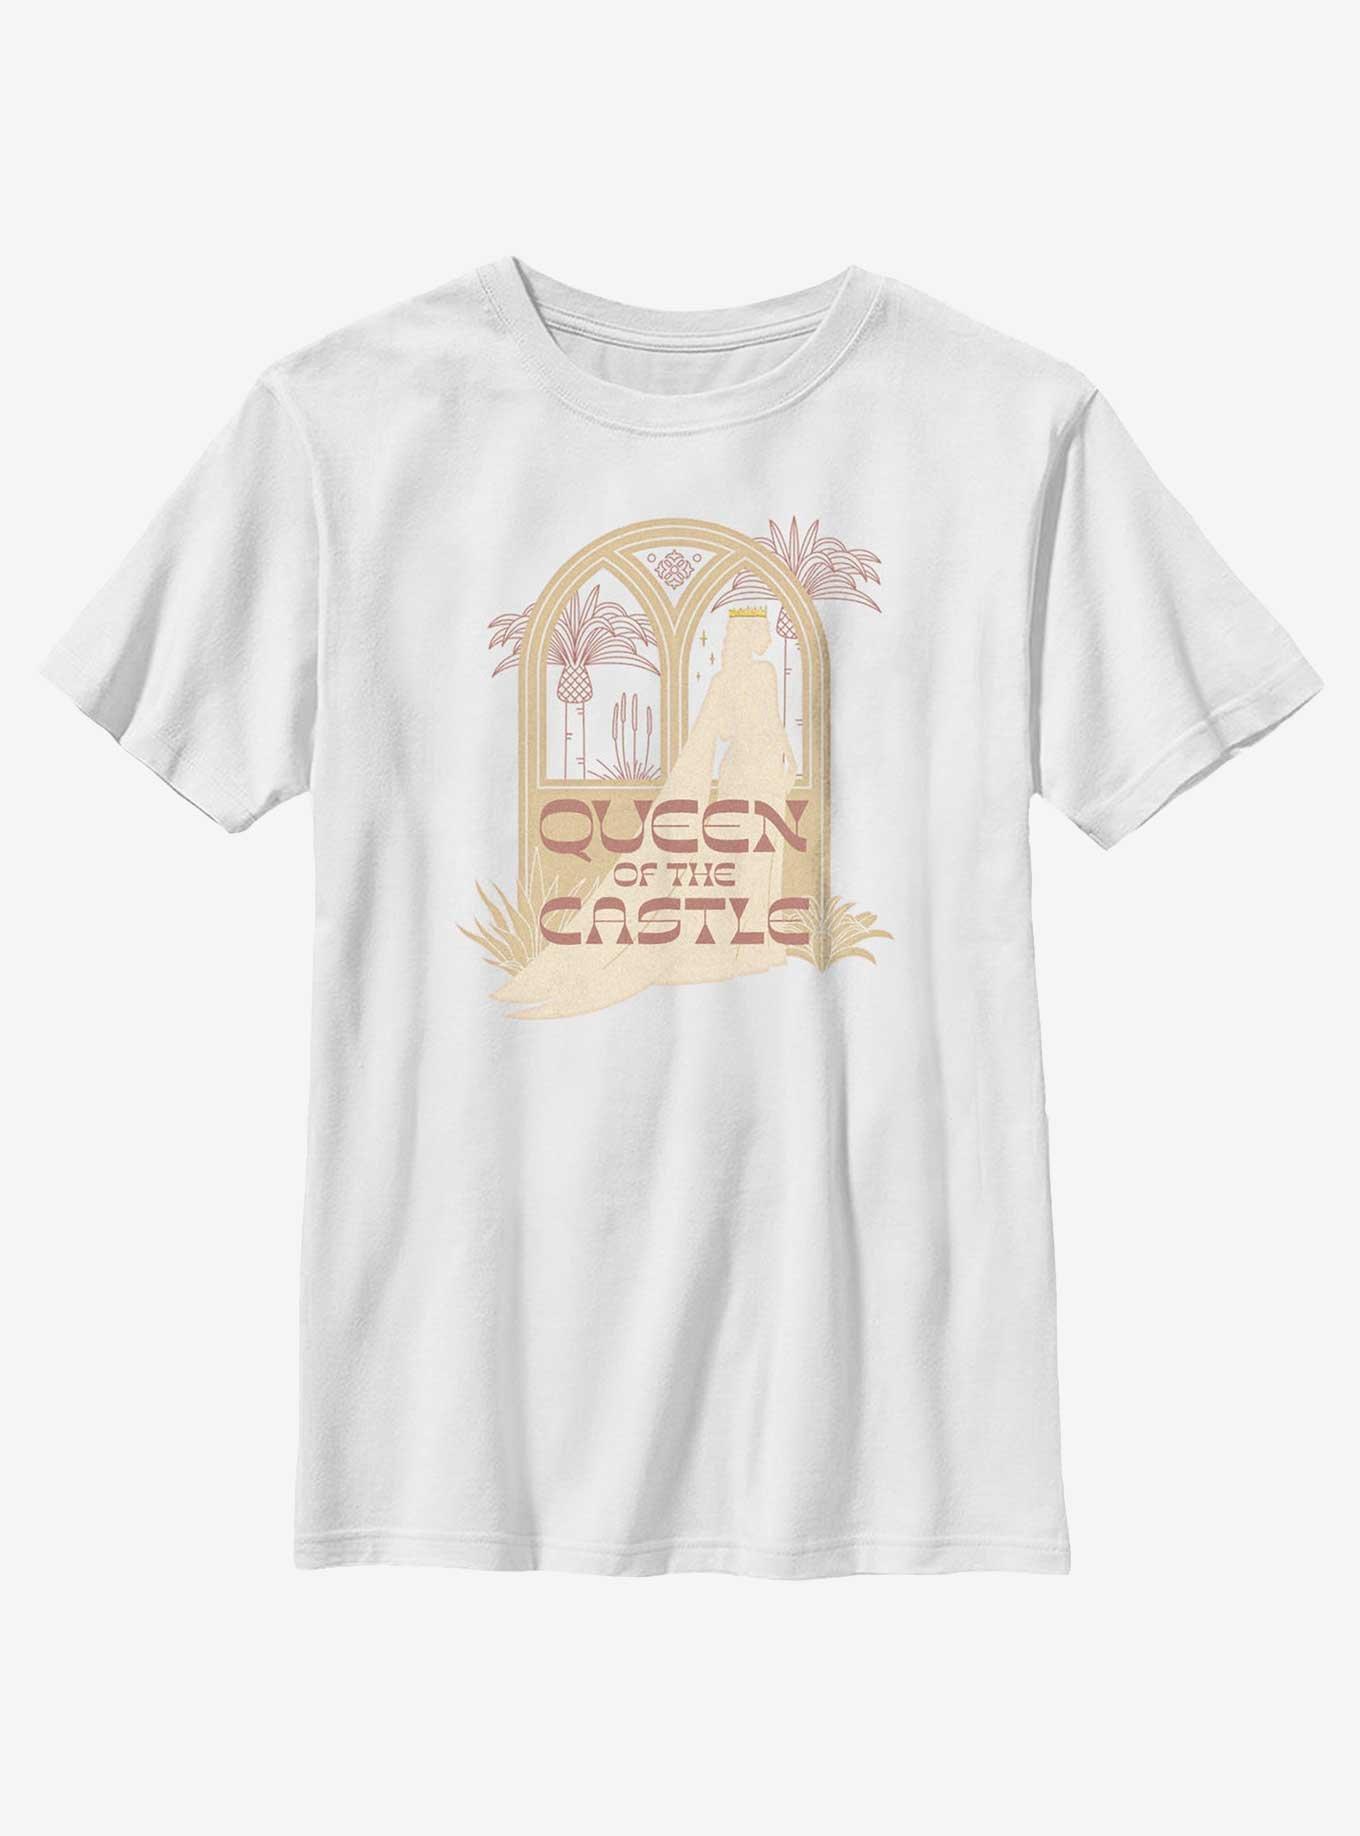 Disney Wish Amaya Queen Of The Castle Youth T-Shirt, WHITE, hi-res